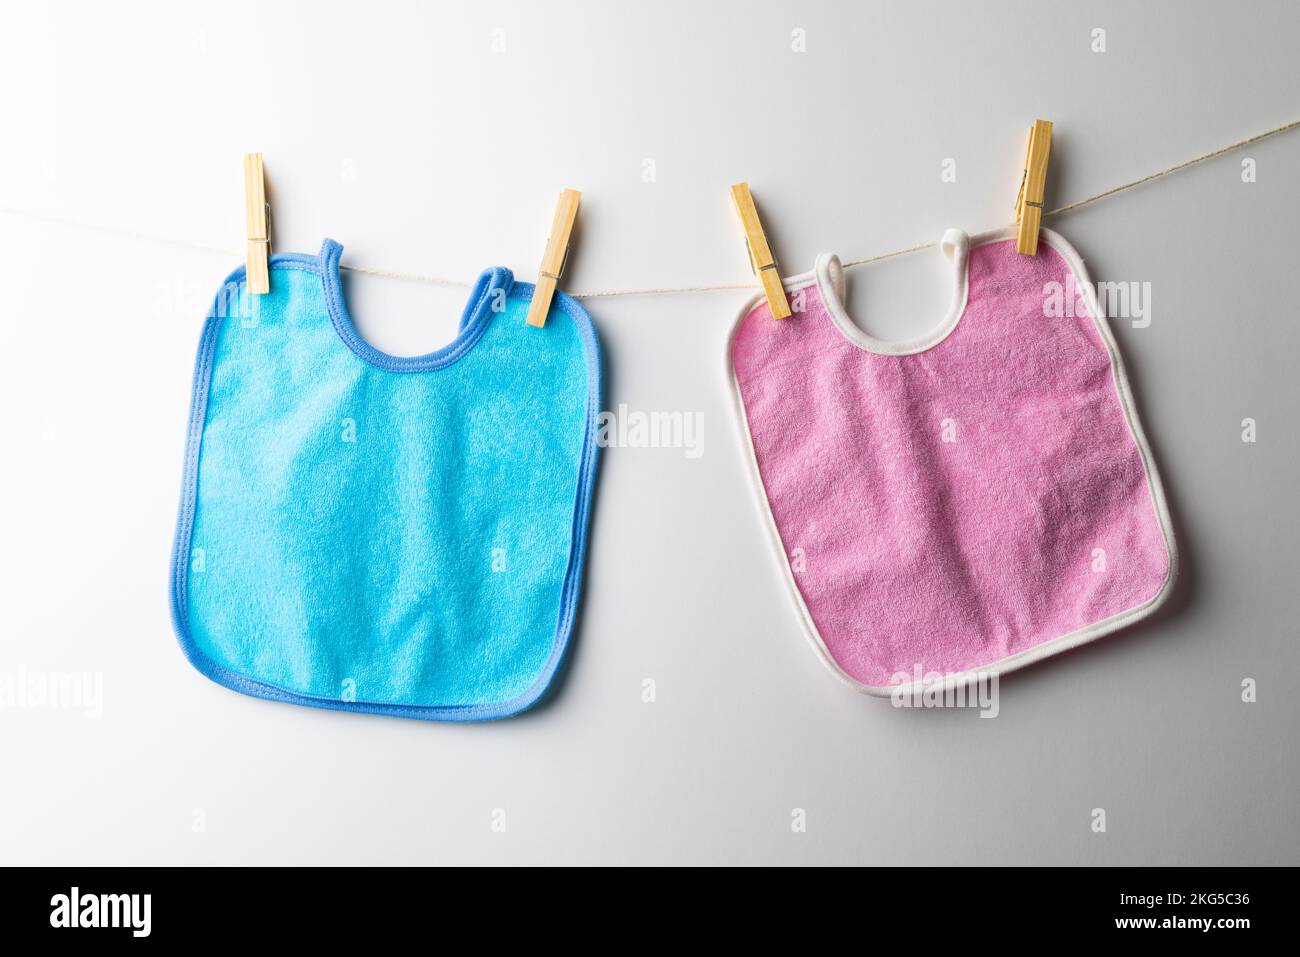 Close up of baby bibs on white background Stock Photo